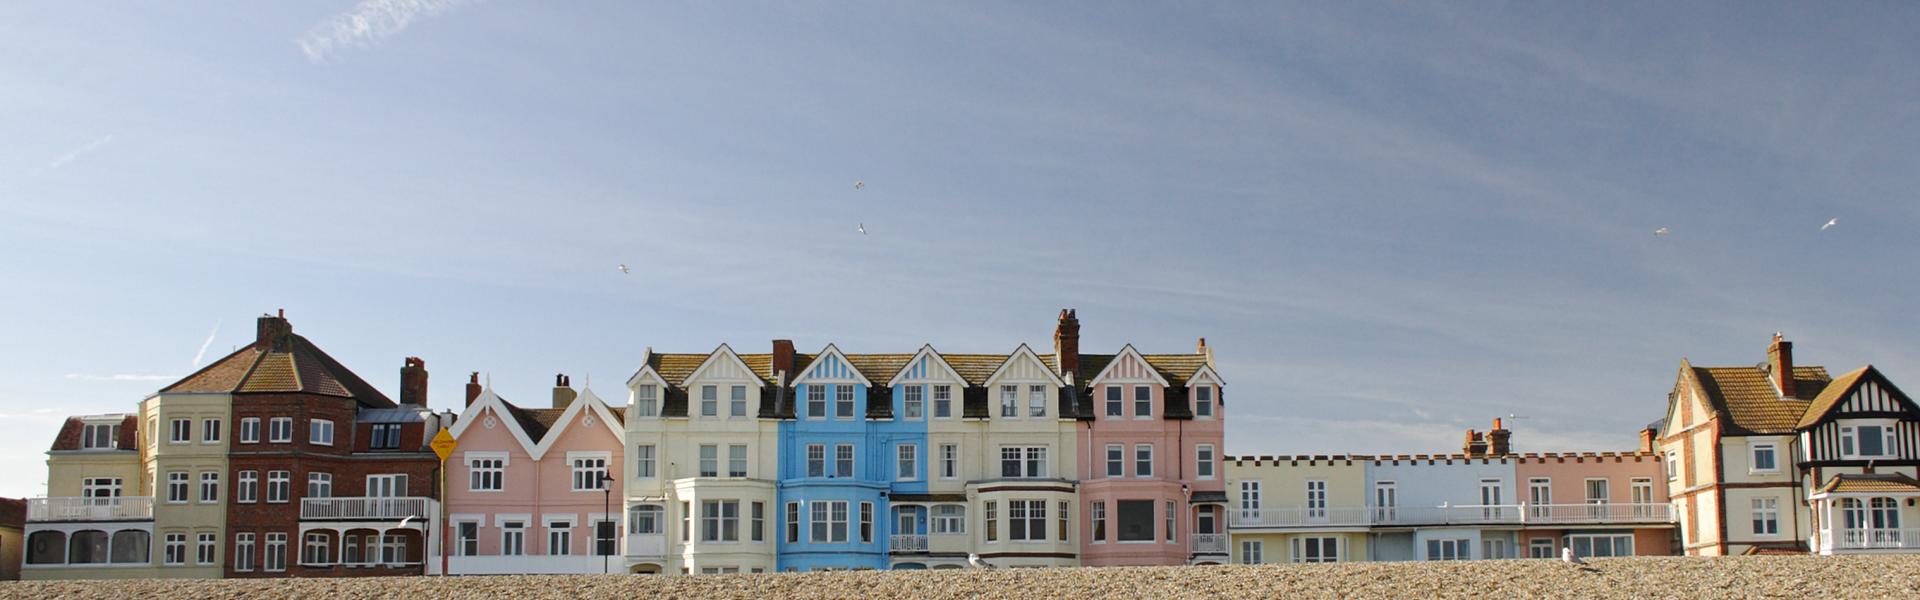 Holiday lettings & accommodation in Suffolk - Wimdu